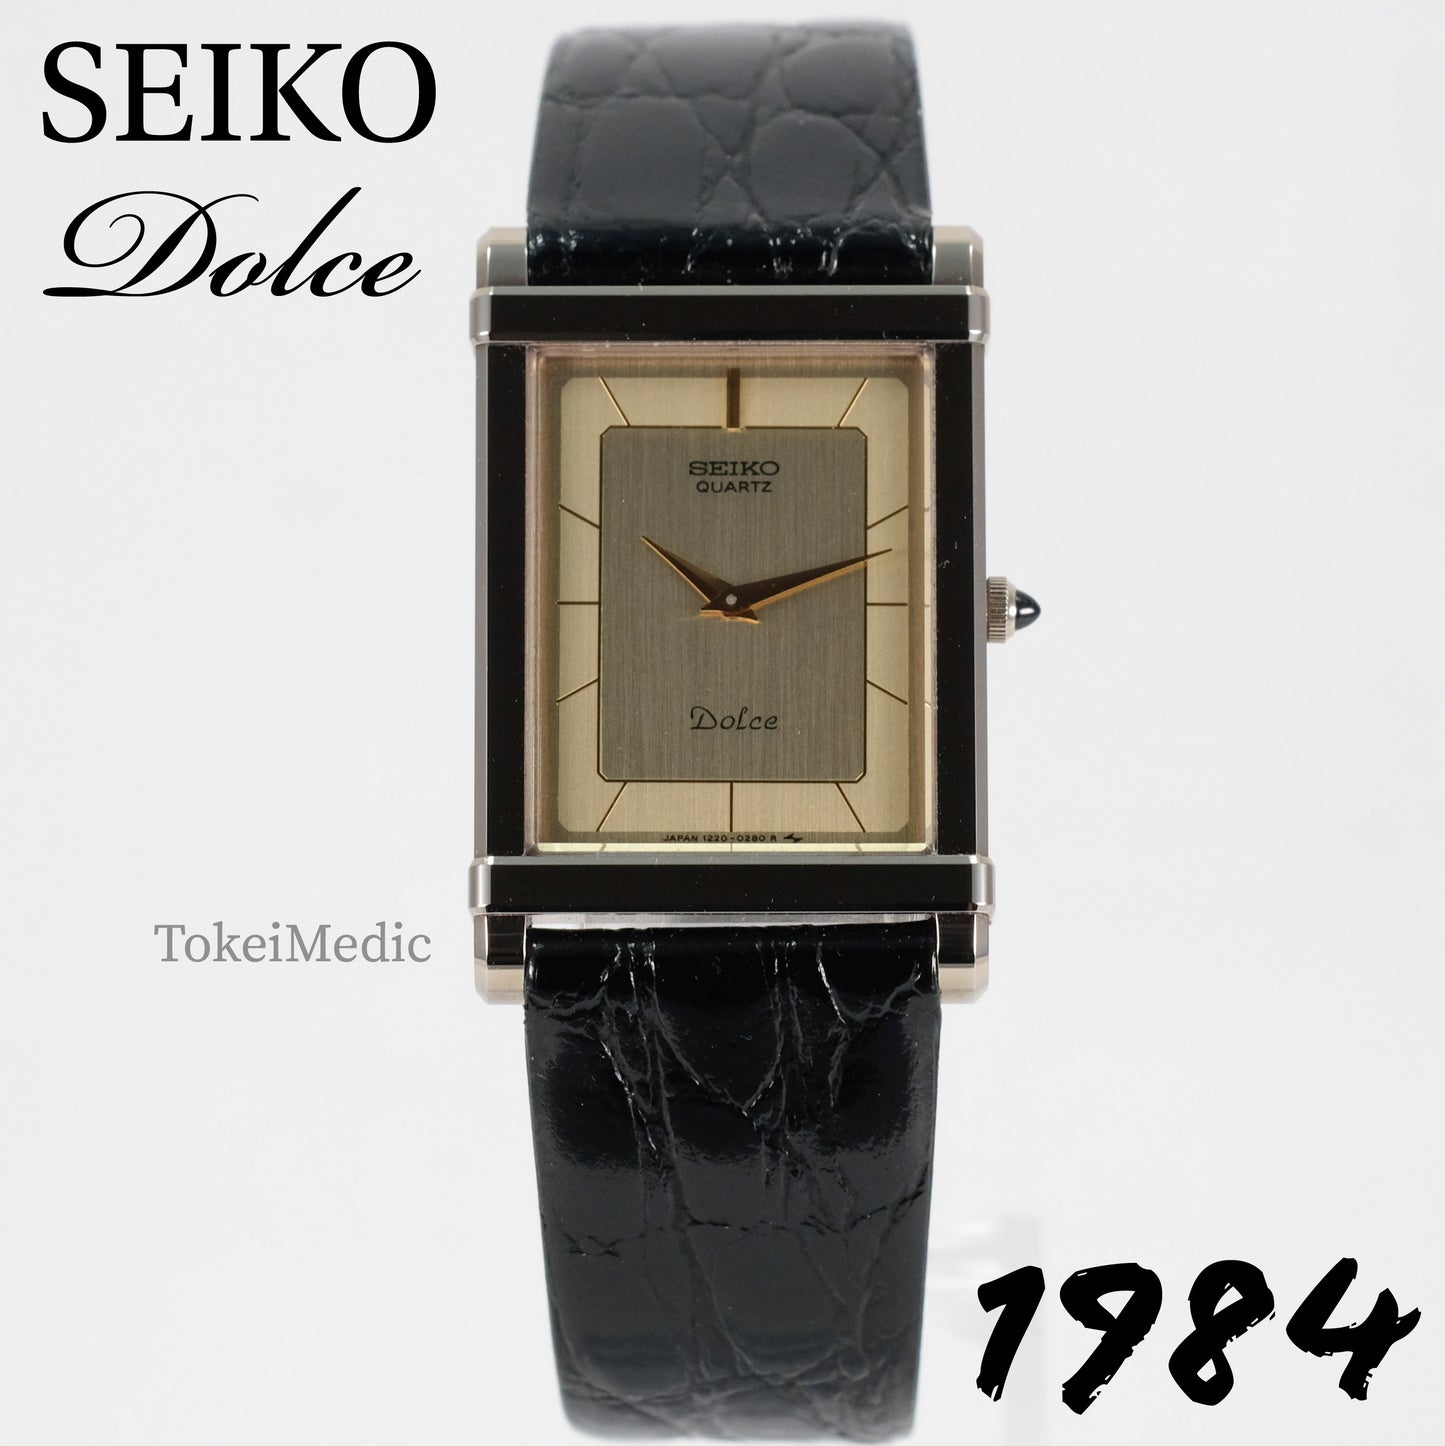 RESERVED! 1984 Seiko Dolce 1220-5110